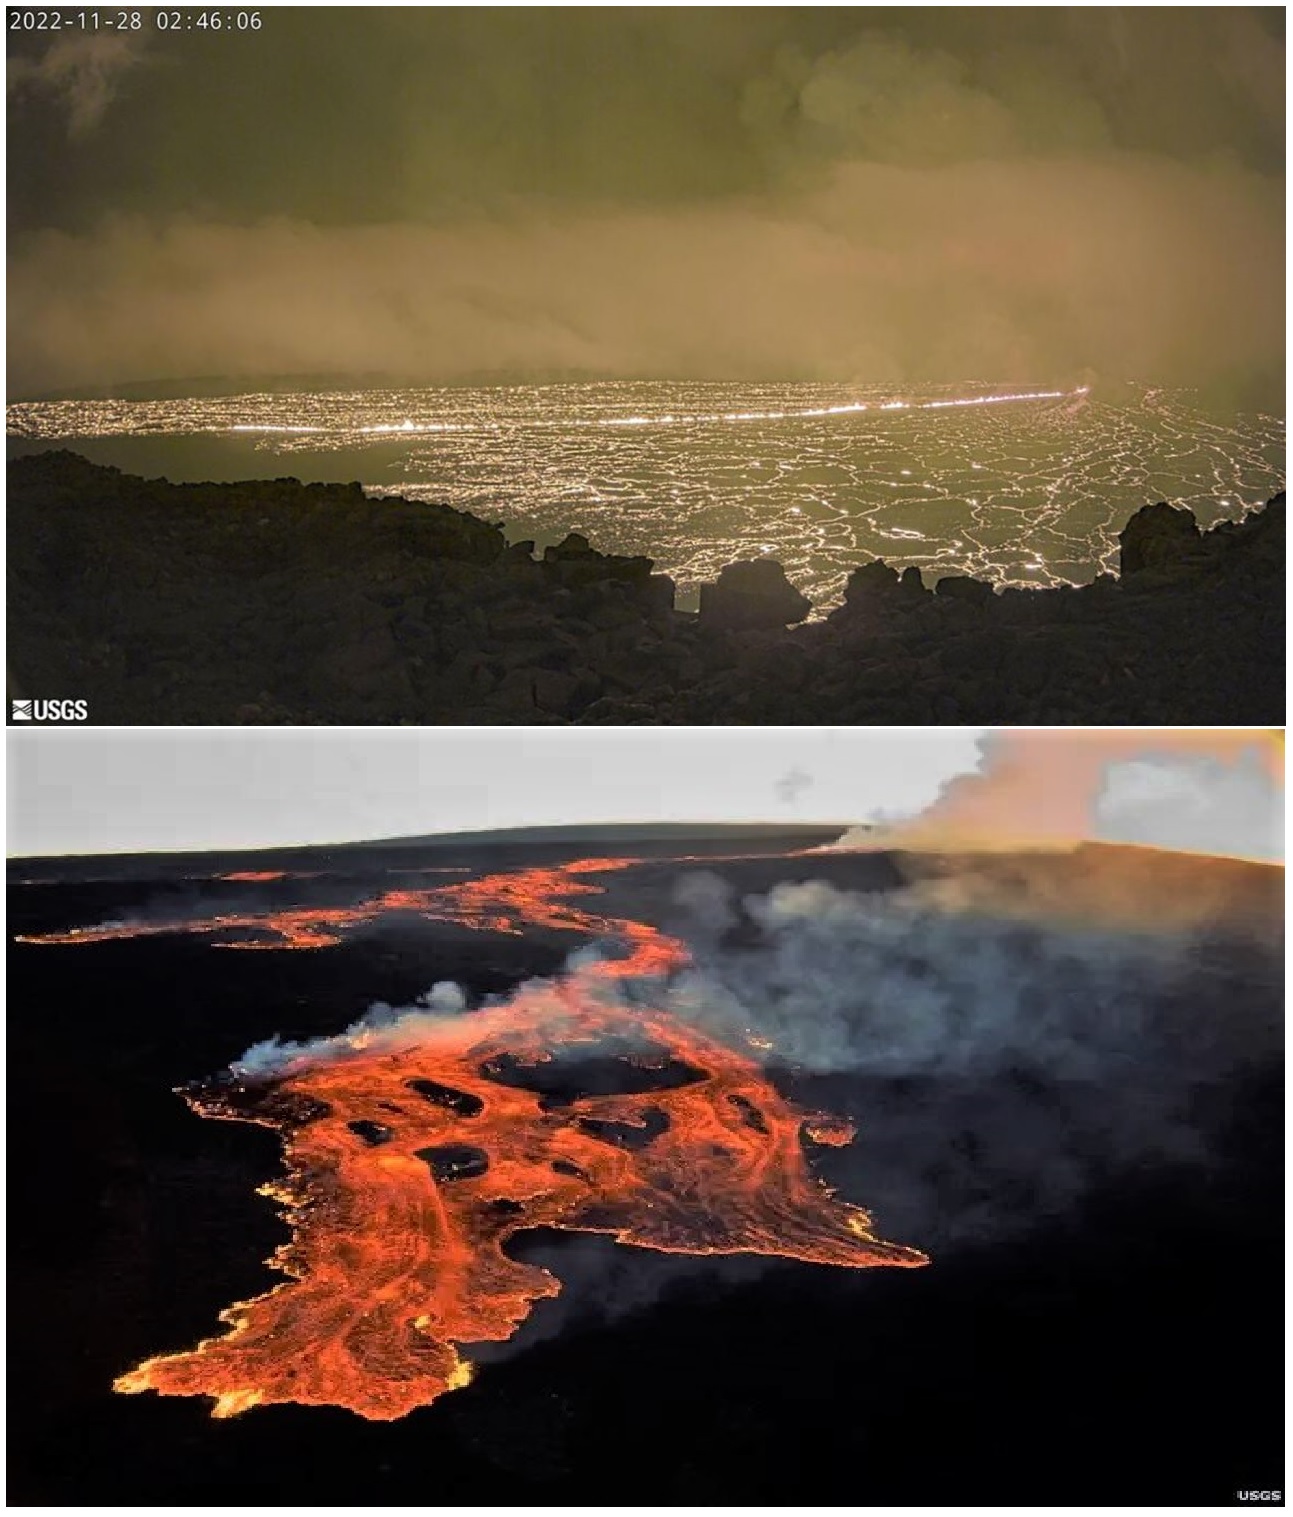 Mauna Loa Volcano erupting - first time in 40 years!